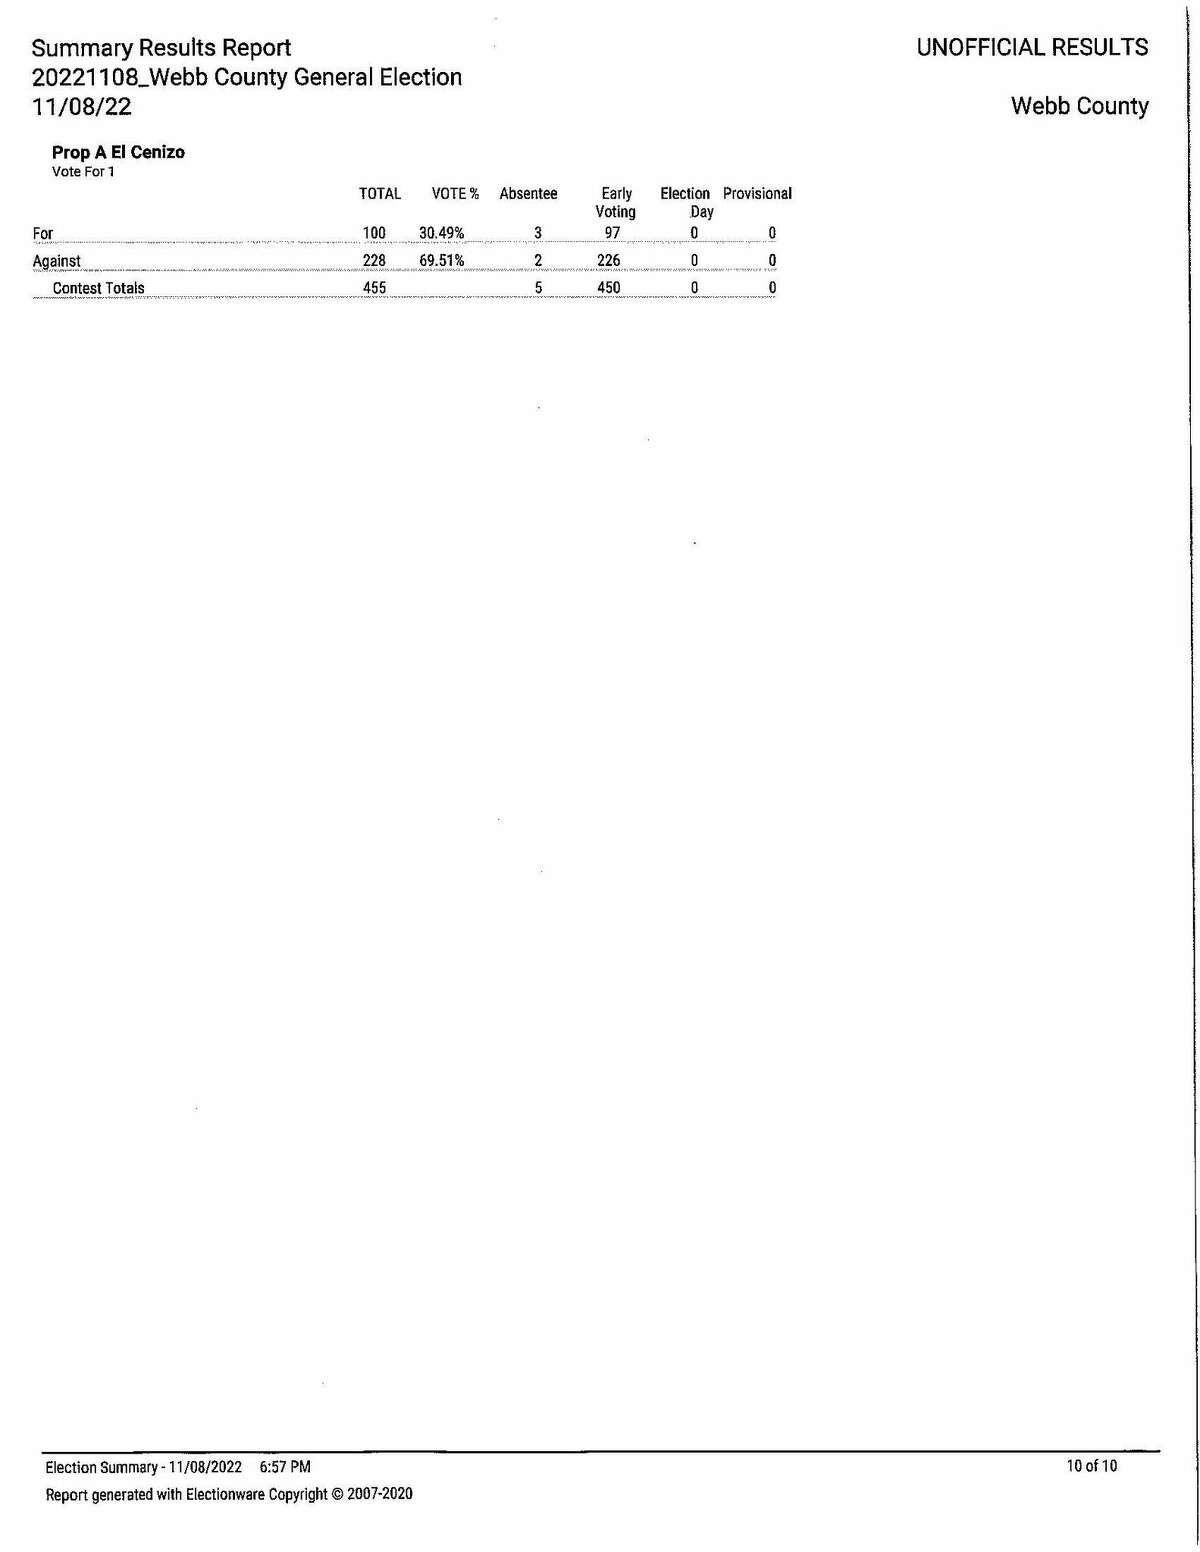 Above are the elections results provided for Webb County by the Webb County Elections Administration Office. 